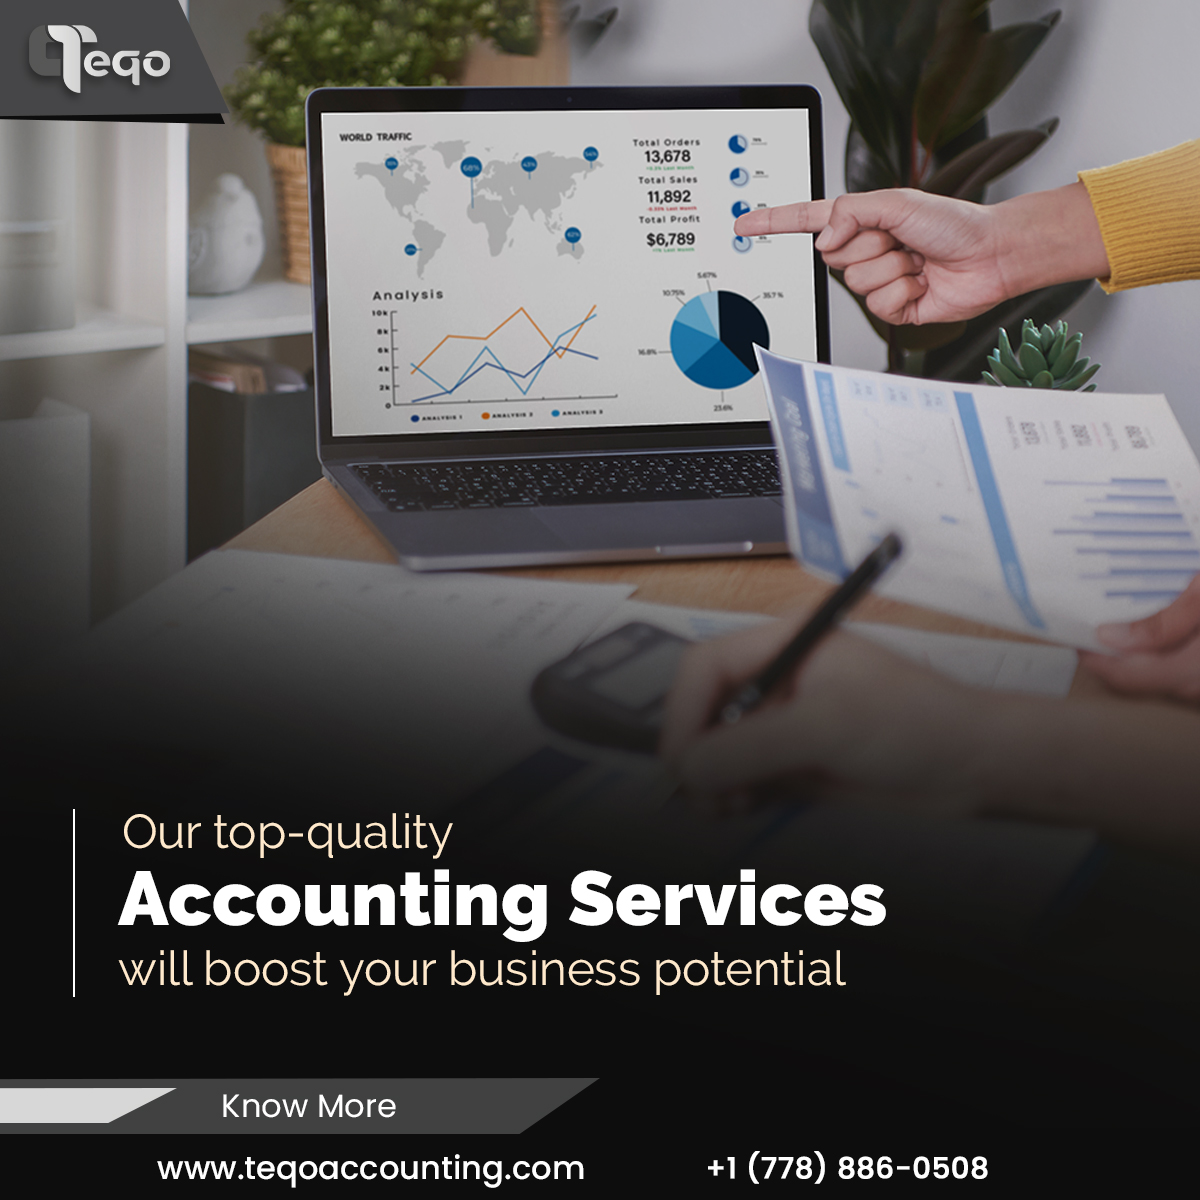 Our top-quality
Accounting Services

will boost your business potential

(TO TRY eT)

www .tegoaccounting.com +1 (778) 886-0508